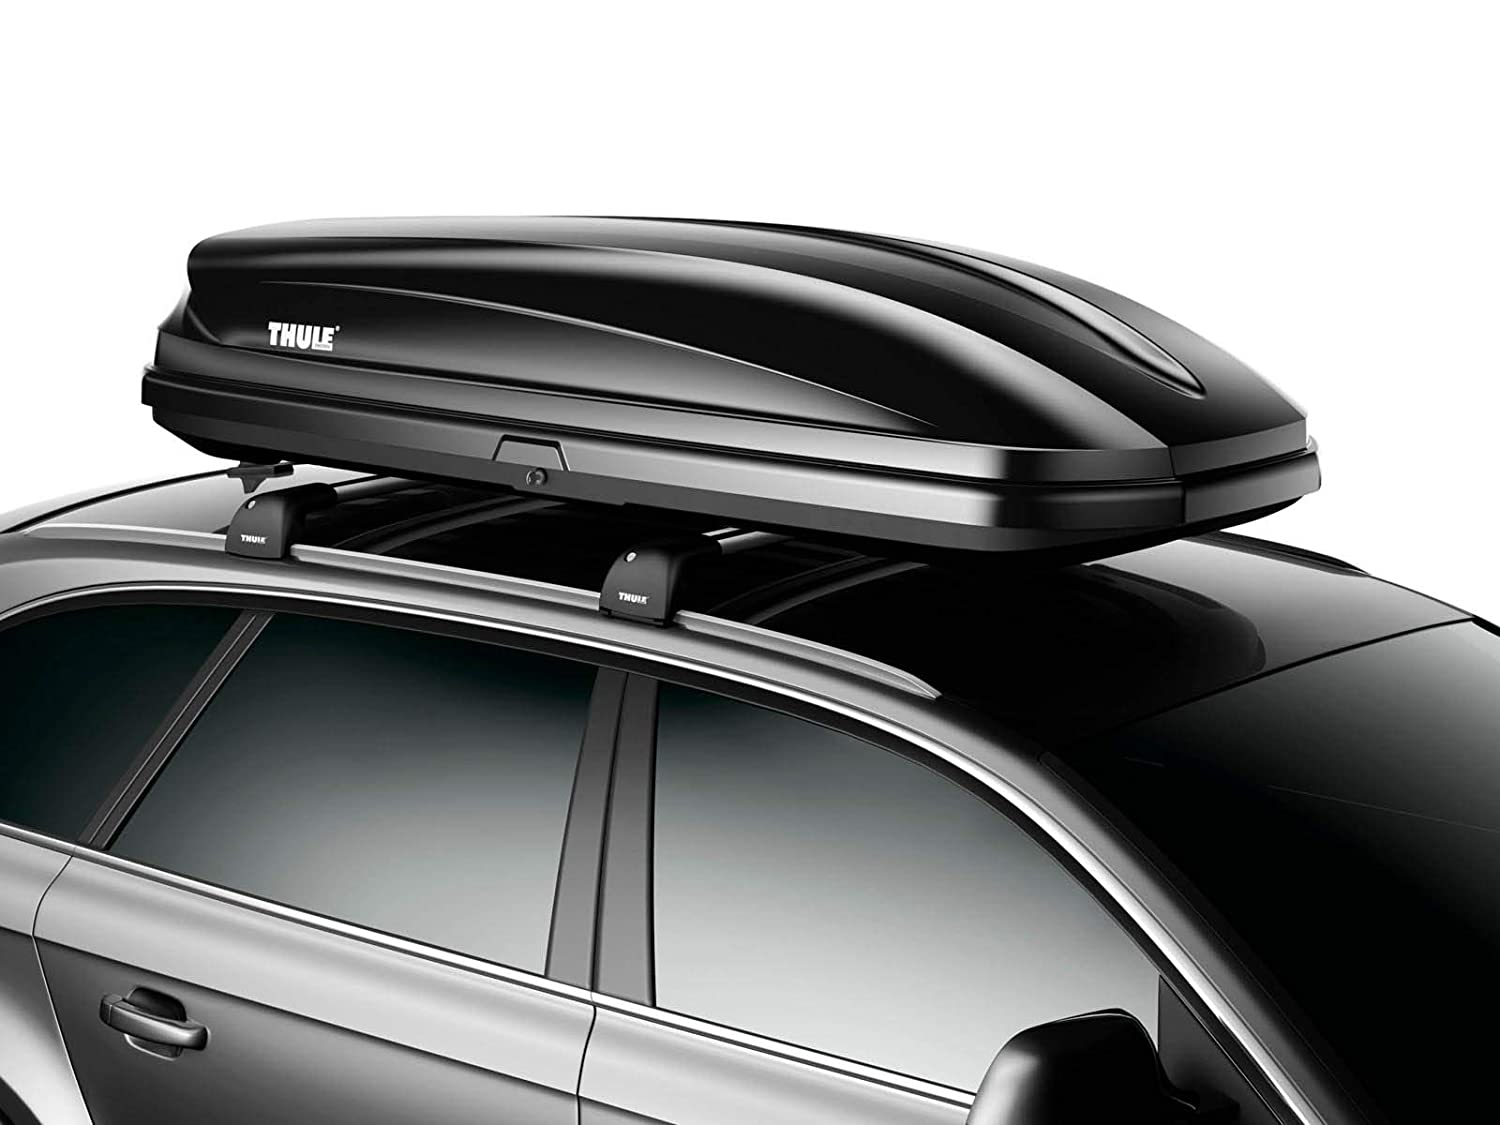 Roof Cargo Box for Subaru Outback - Best Products For You & Your Home Best Cargo Box For Subaru Outback 2020